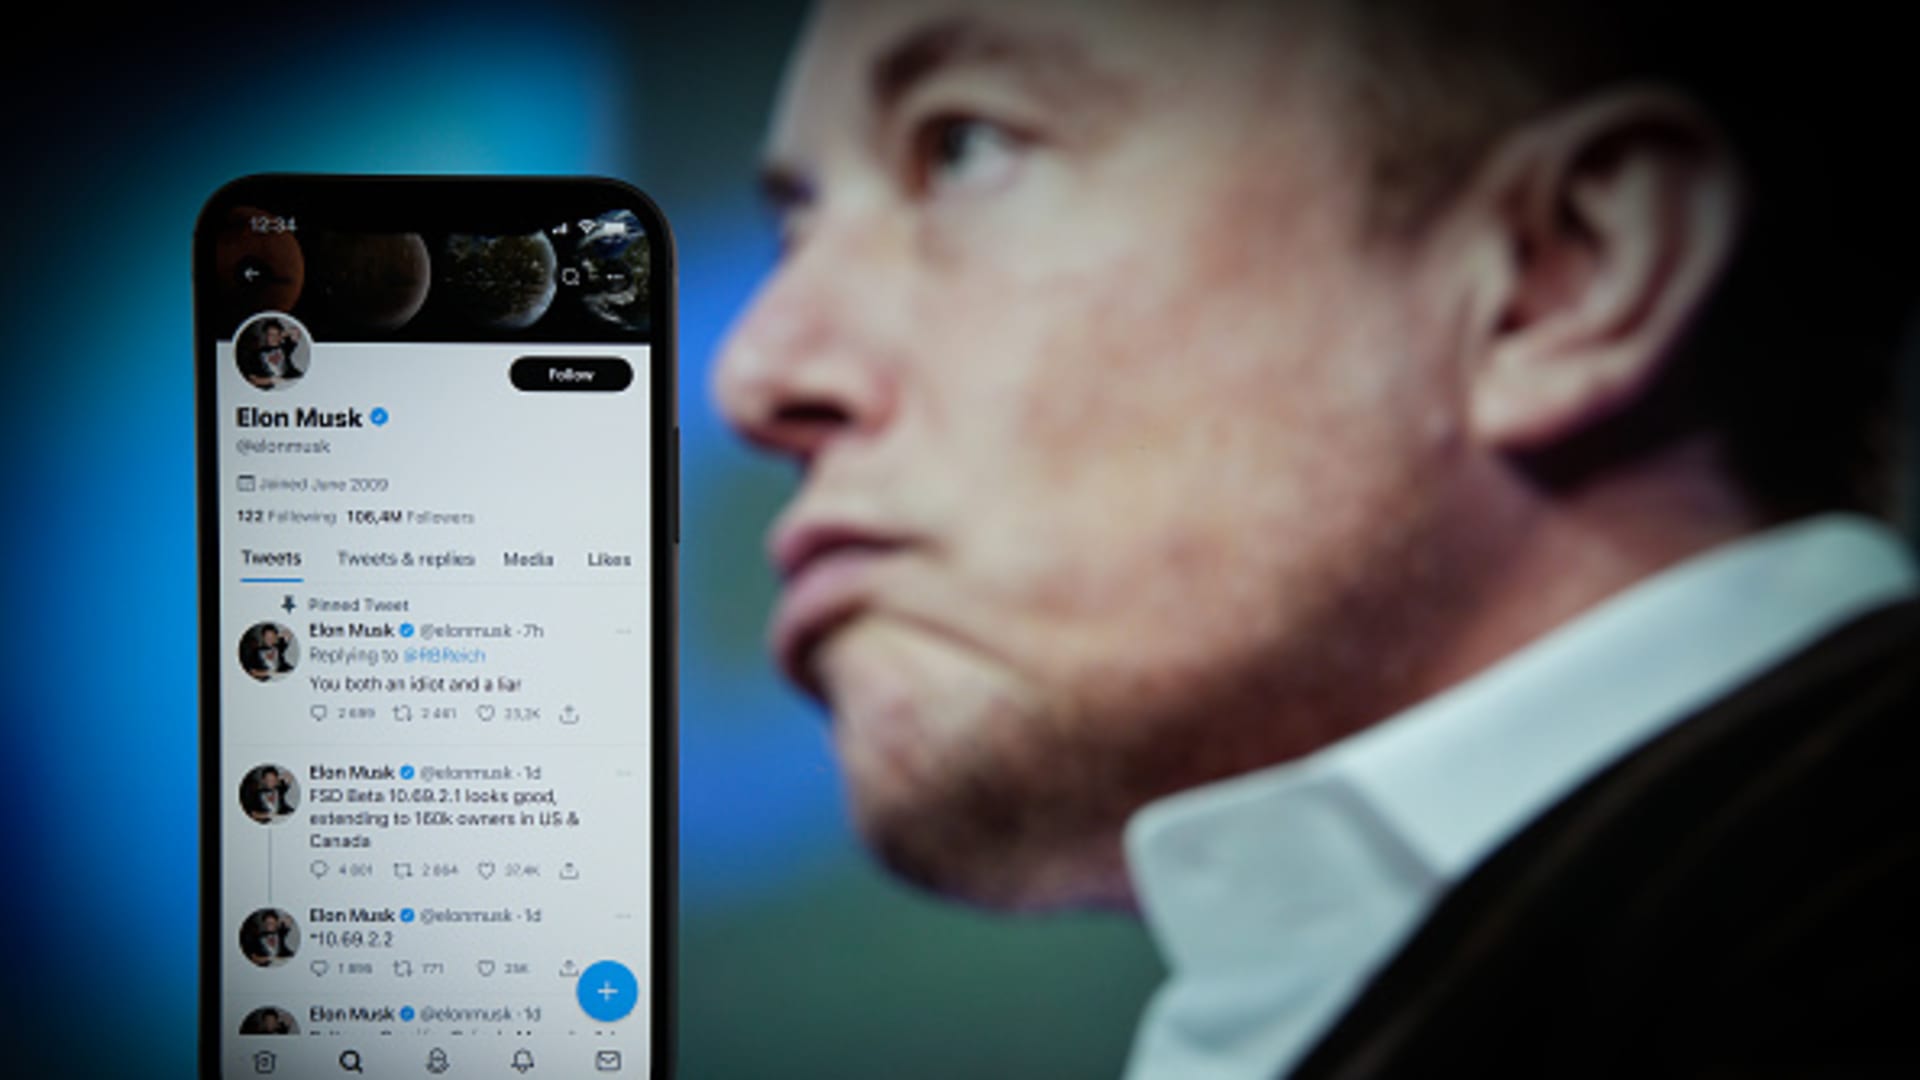 Elon Musk changes course and proposes going through with Twitter deal at original price: Sources